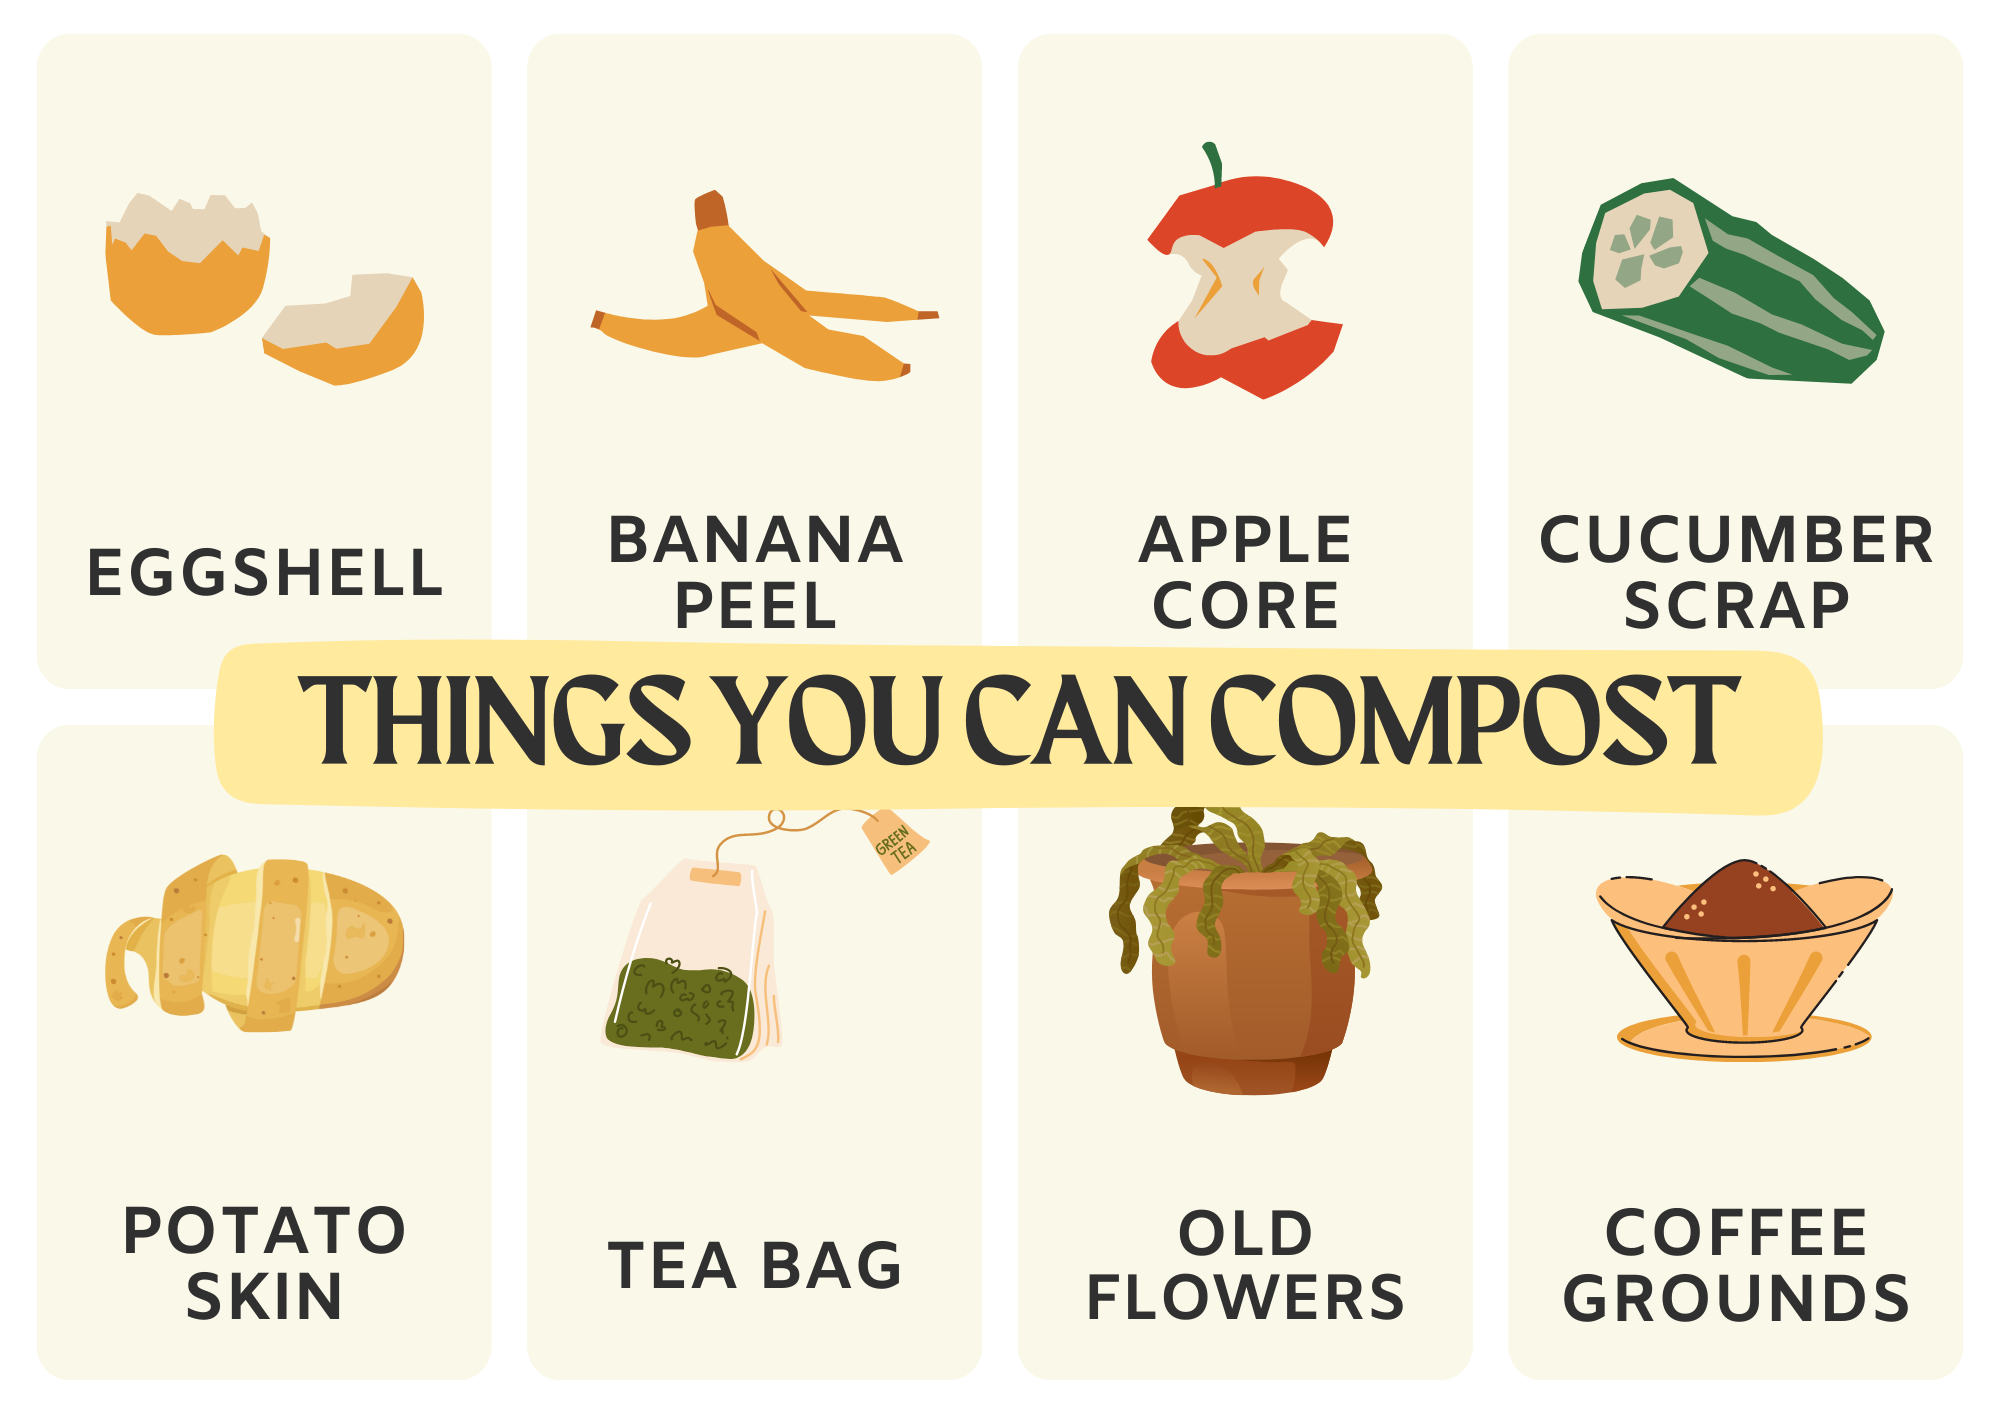 Things you can compost to reduce food waste in restaurants